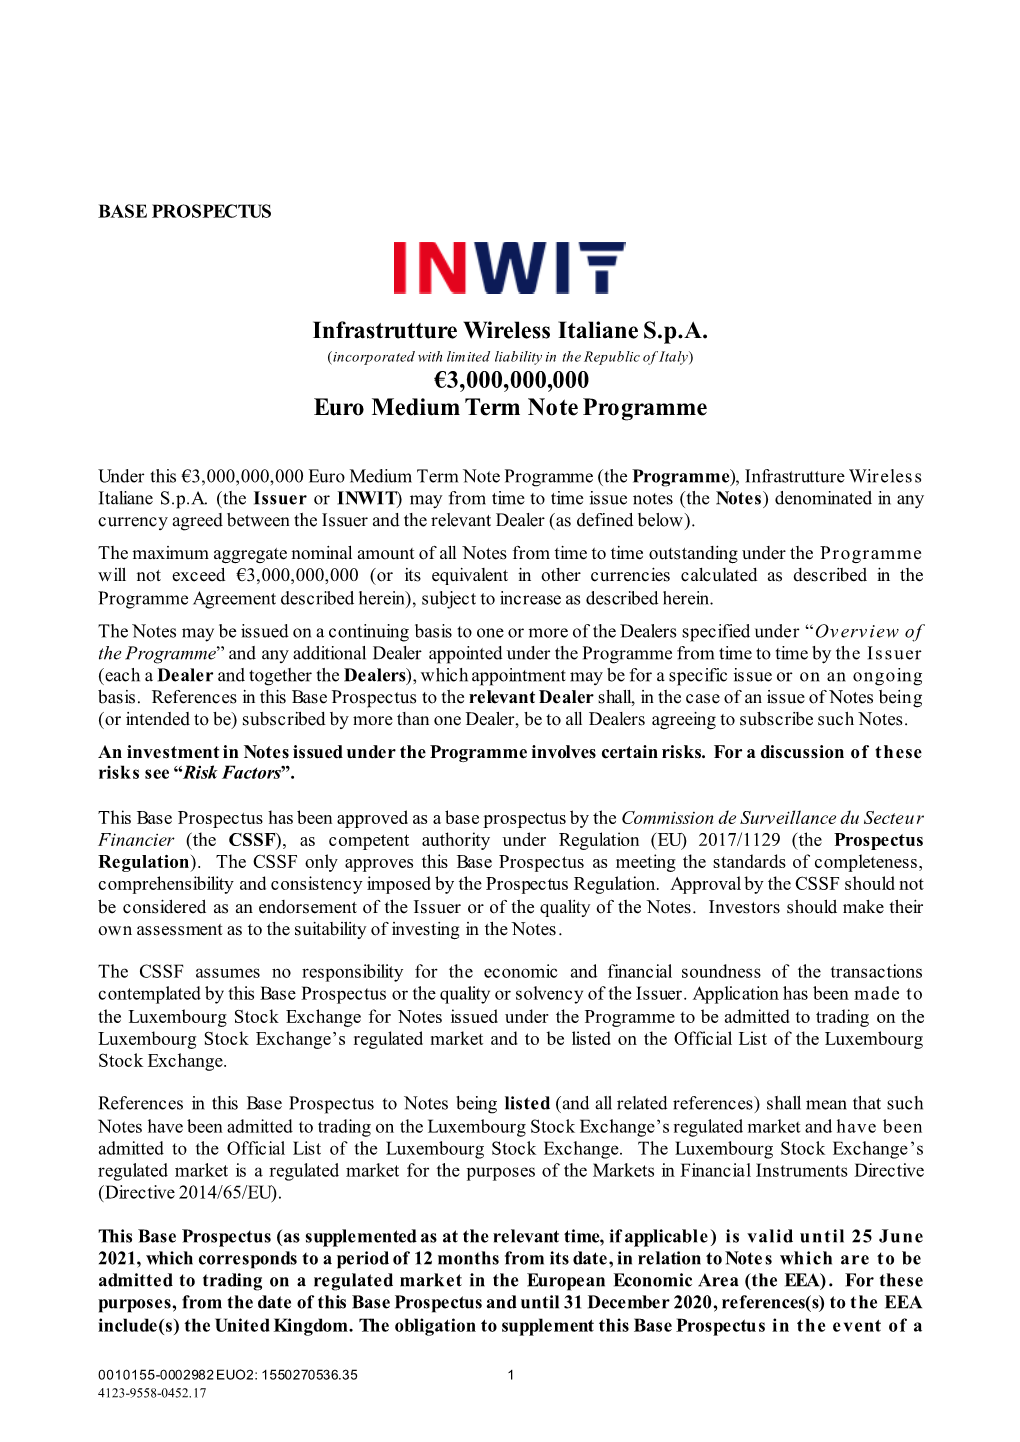 Infrastrutture Wireless Italiane S.P.A. (Incorporated with Limited Liability in the Republic of Italy) €3,000,000,000 Euro Medium Term Note Programme